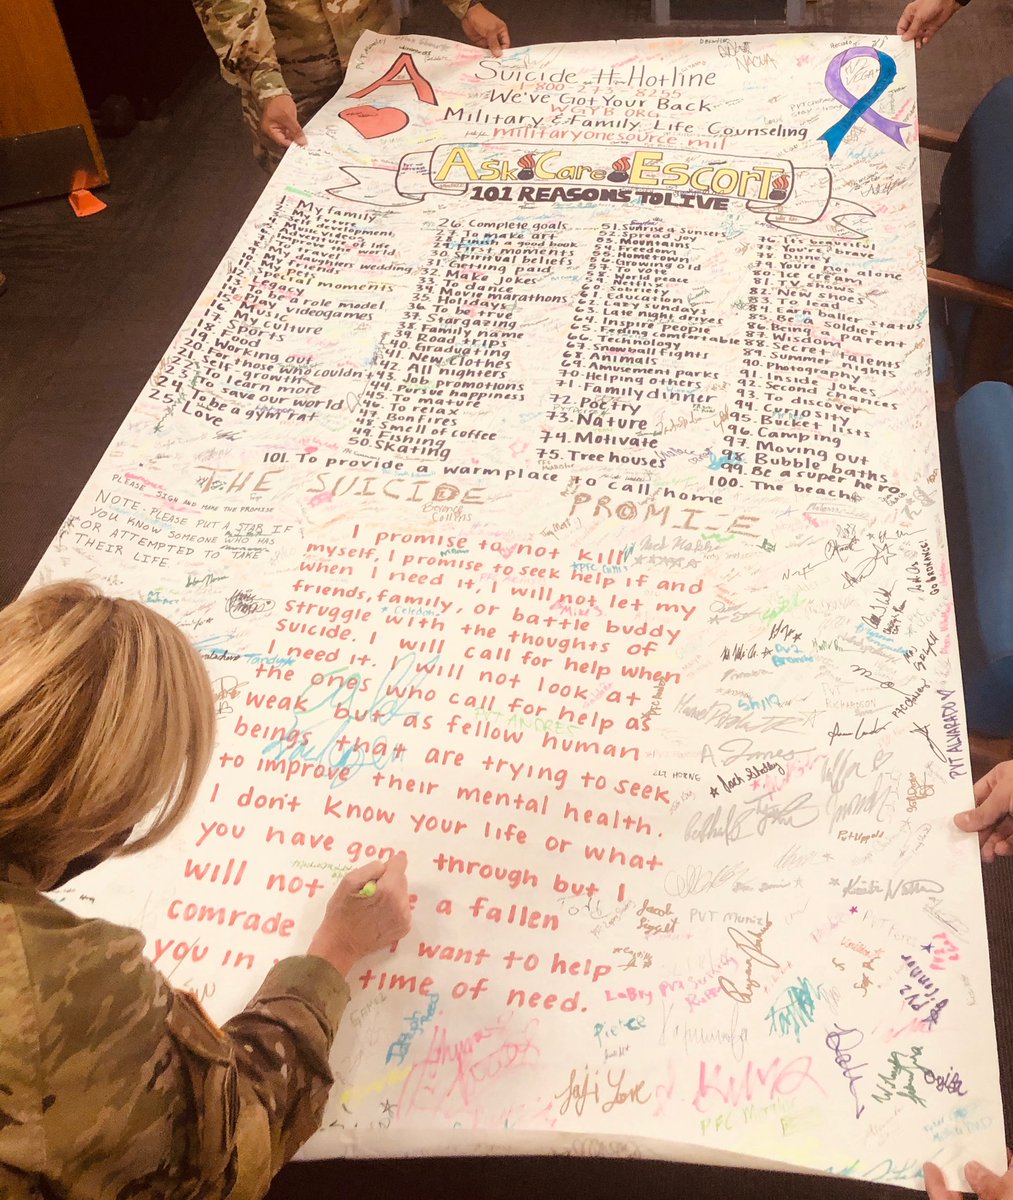 Honored to sign the pledge  @16thBravo @16OD_BN of a life worth living. Talking about tough times and stressful situations is hard. You are not alone. 

For support visit MilitaryCrisisLine.net or call 1-800-273-8255.

#BeThere #SuicidePreventionMonth